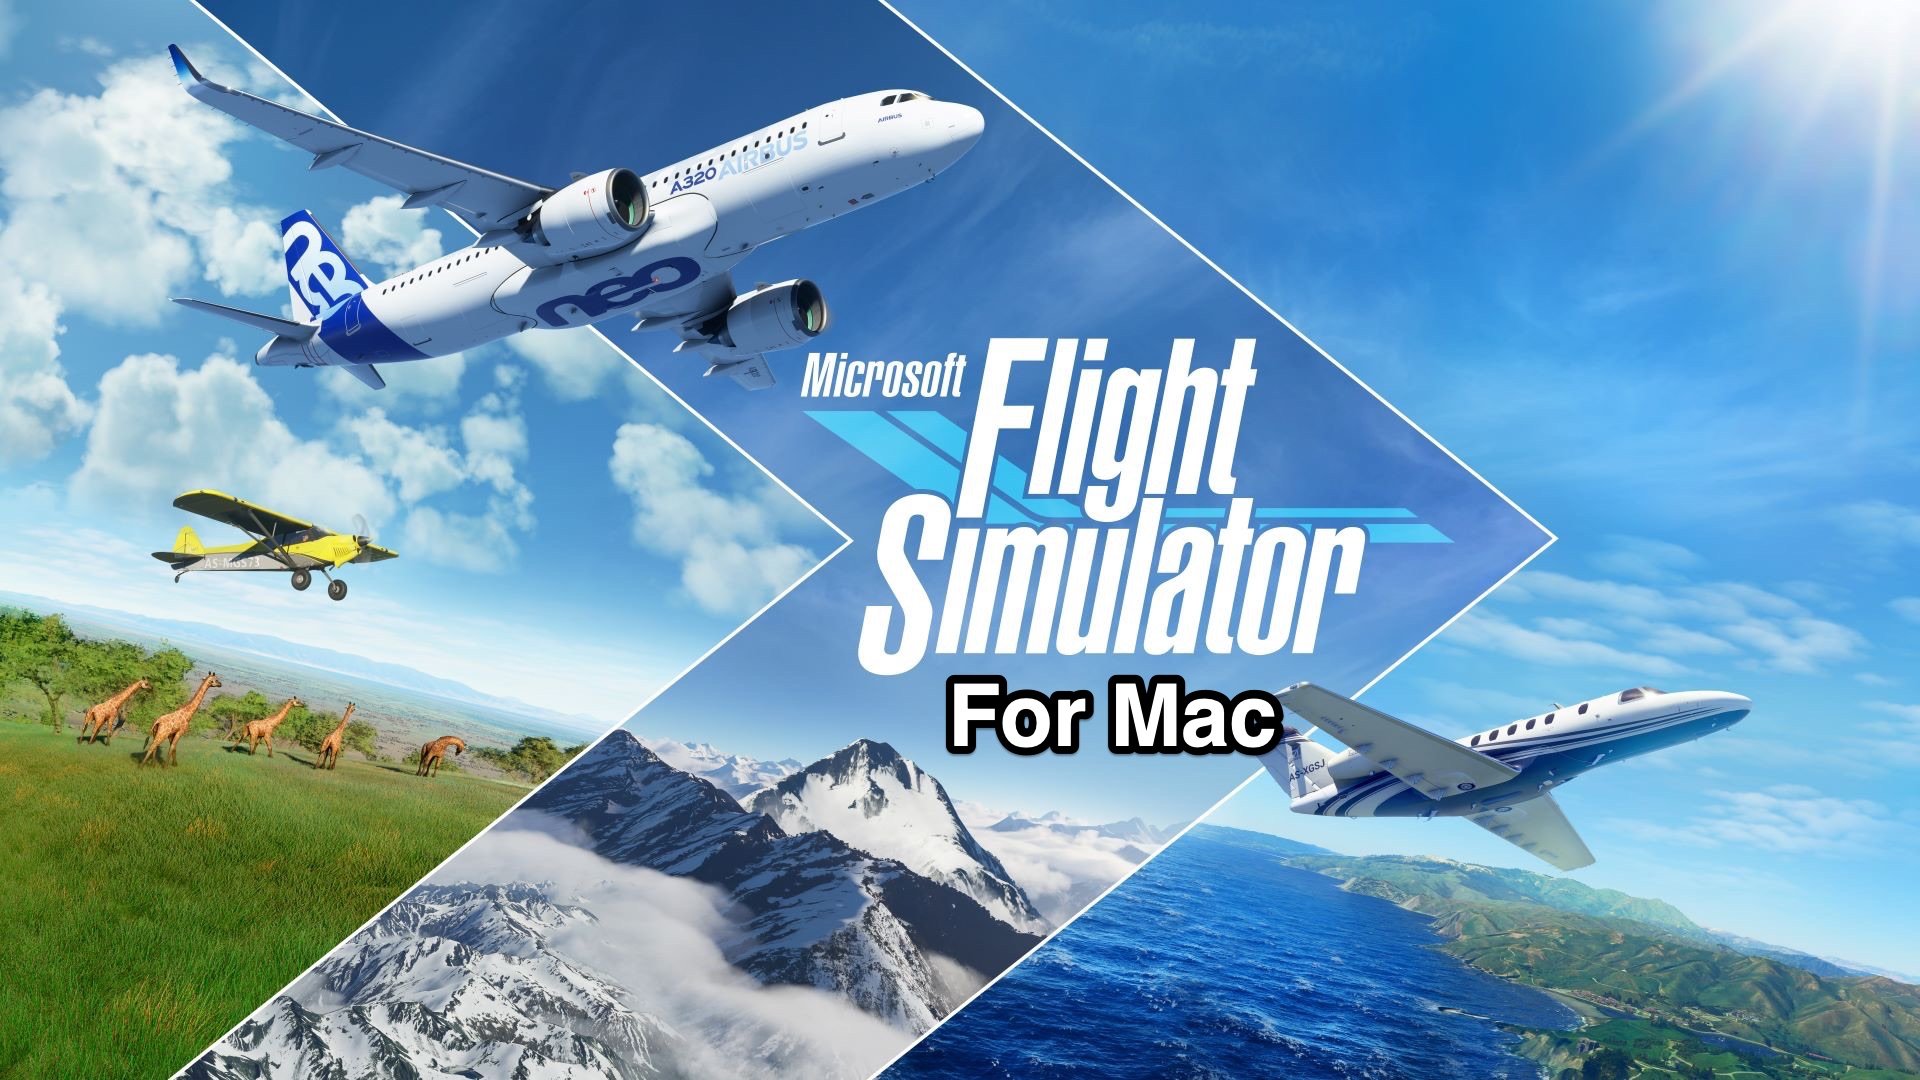 helicopter simulator for mac free